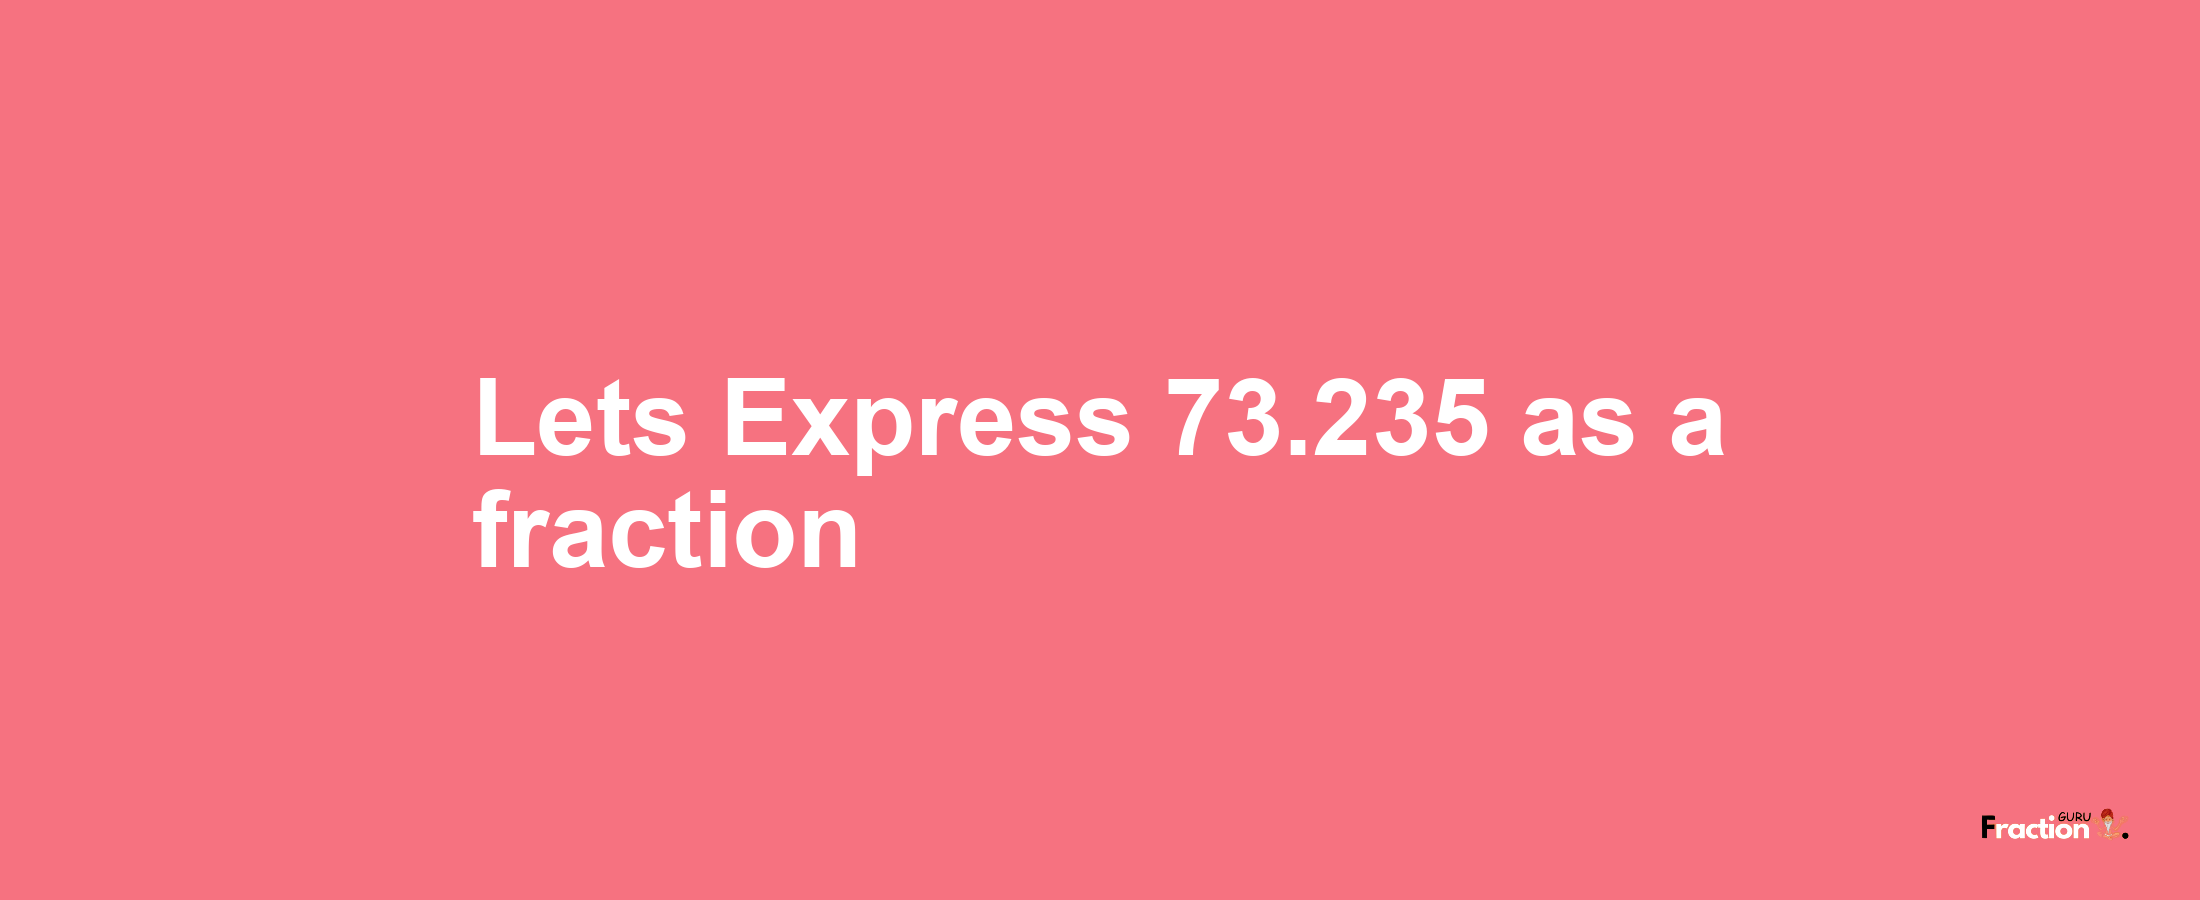 Lets Express 73.235 as afraction